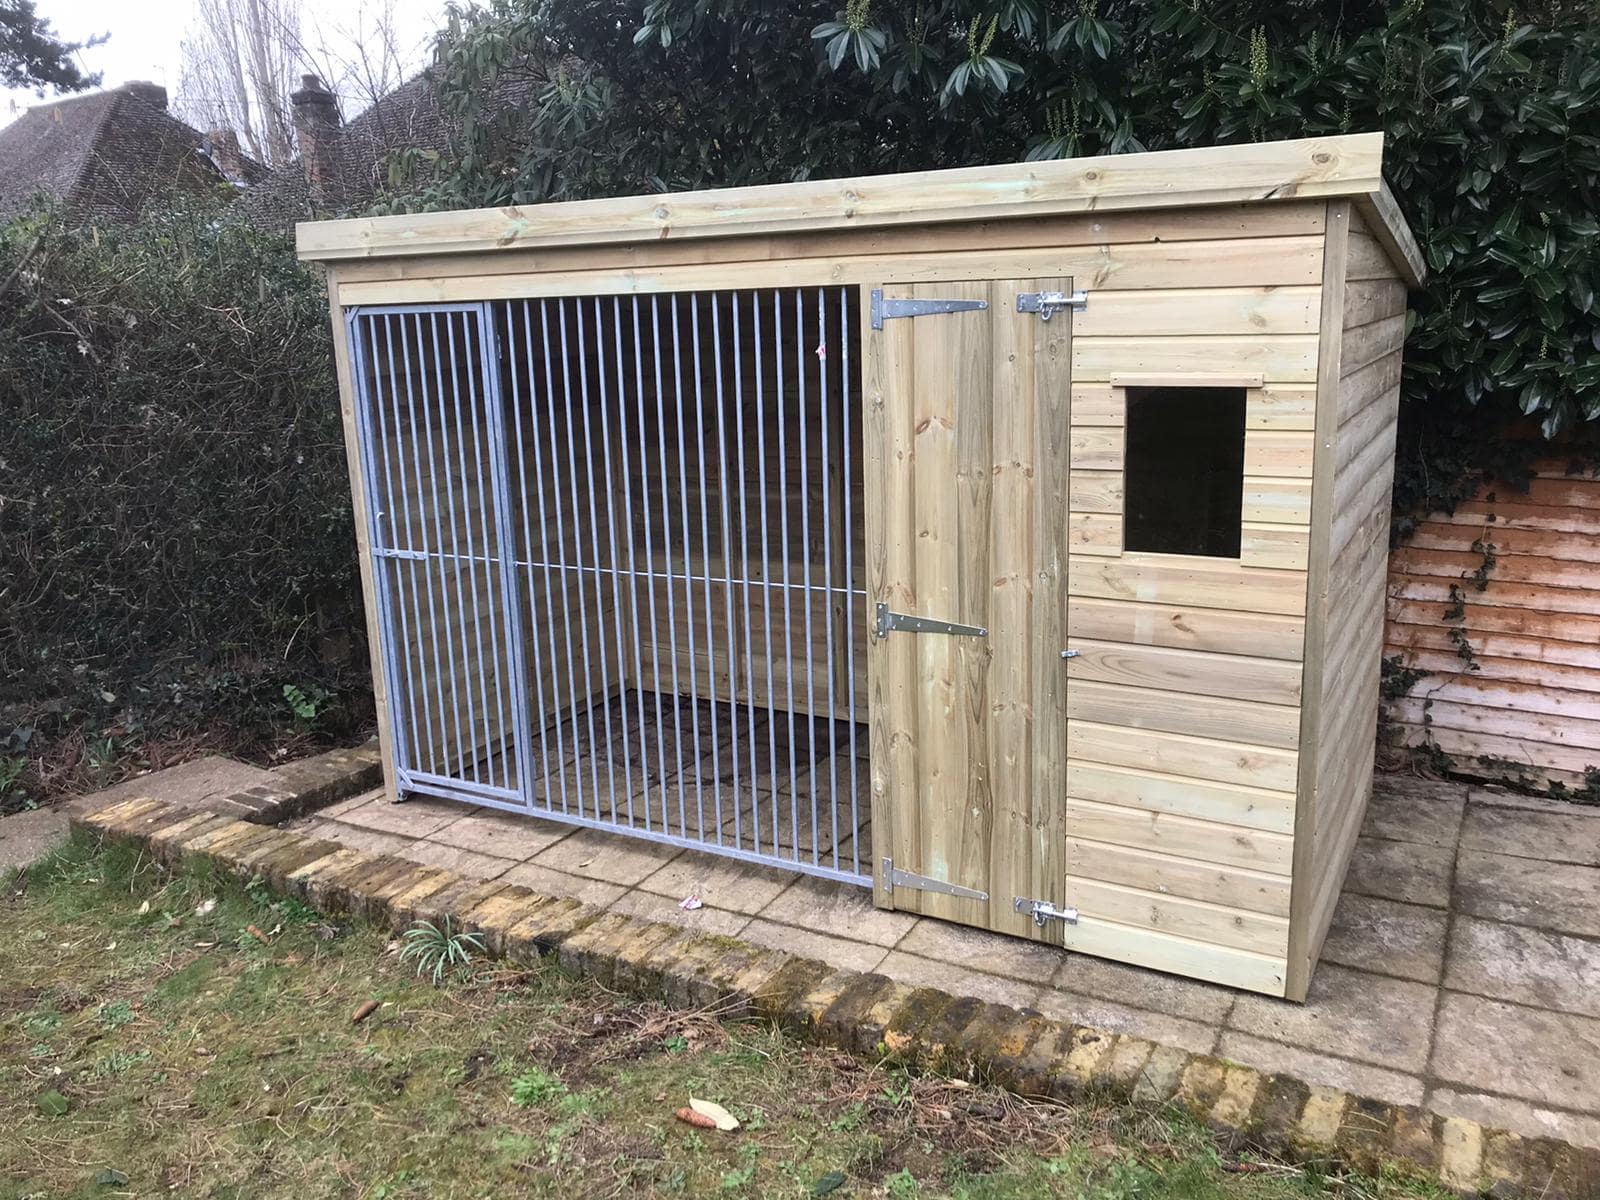 Stapeley Wooden Dog Kennel And Run 12ft (wide) x 4ft (deep) x 6'6ft (high)